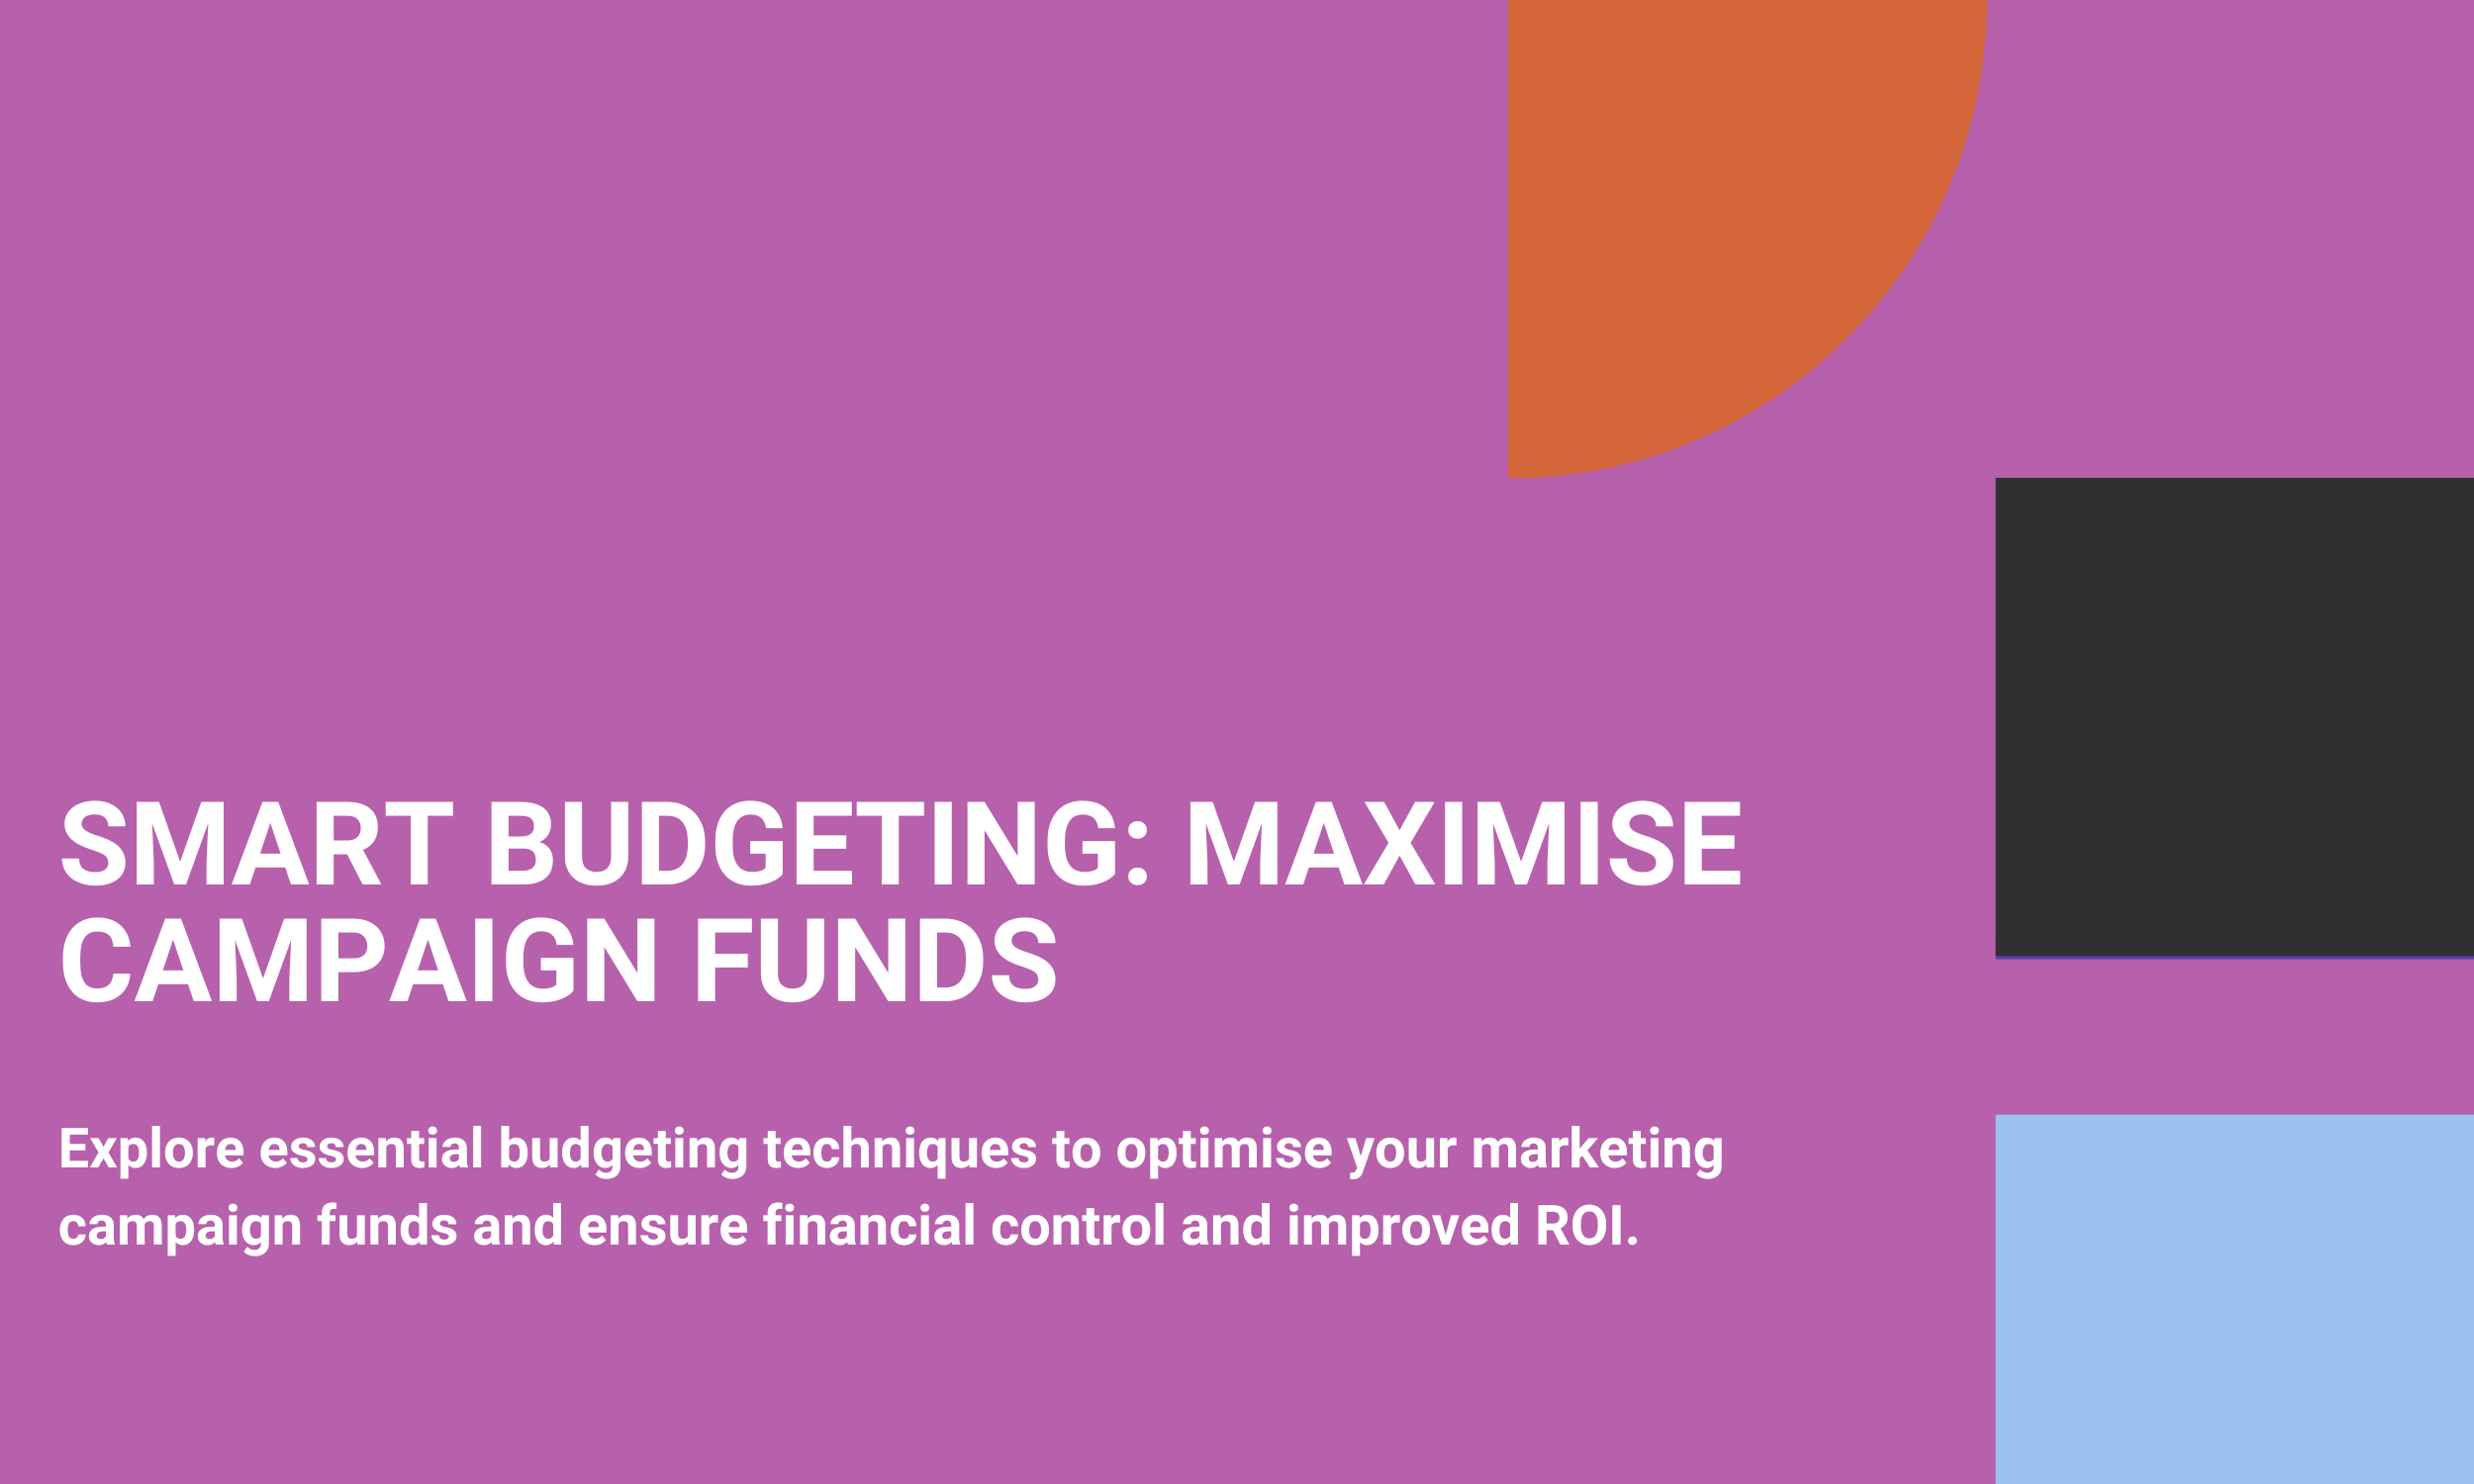 Smart Budgeting: Maximise Campaign Funds